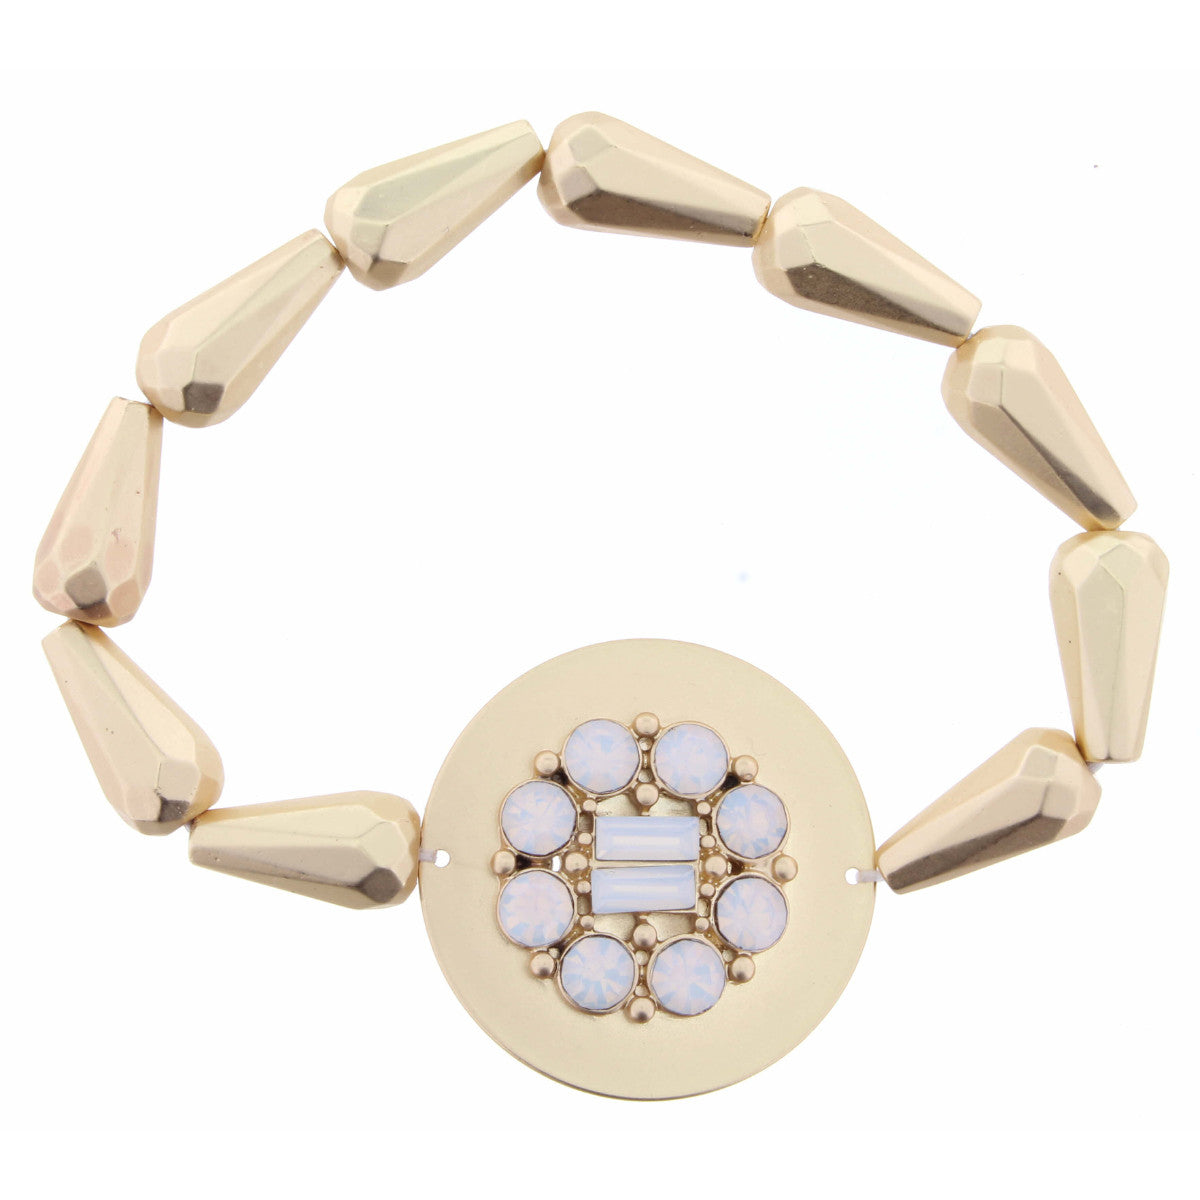 Daphne Bracelet - Gold Disc with Moon Stone Circle and Square Rhinestones on Gold Beads-Bracelet-Lemons and Limes Boutique